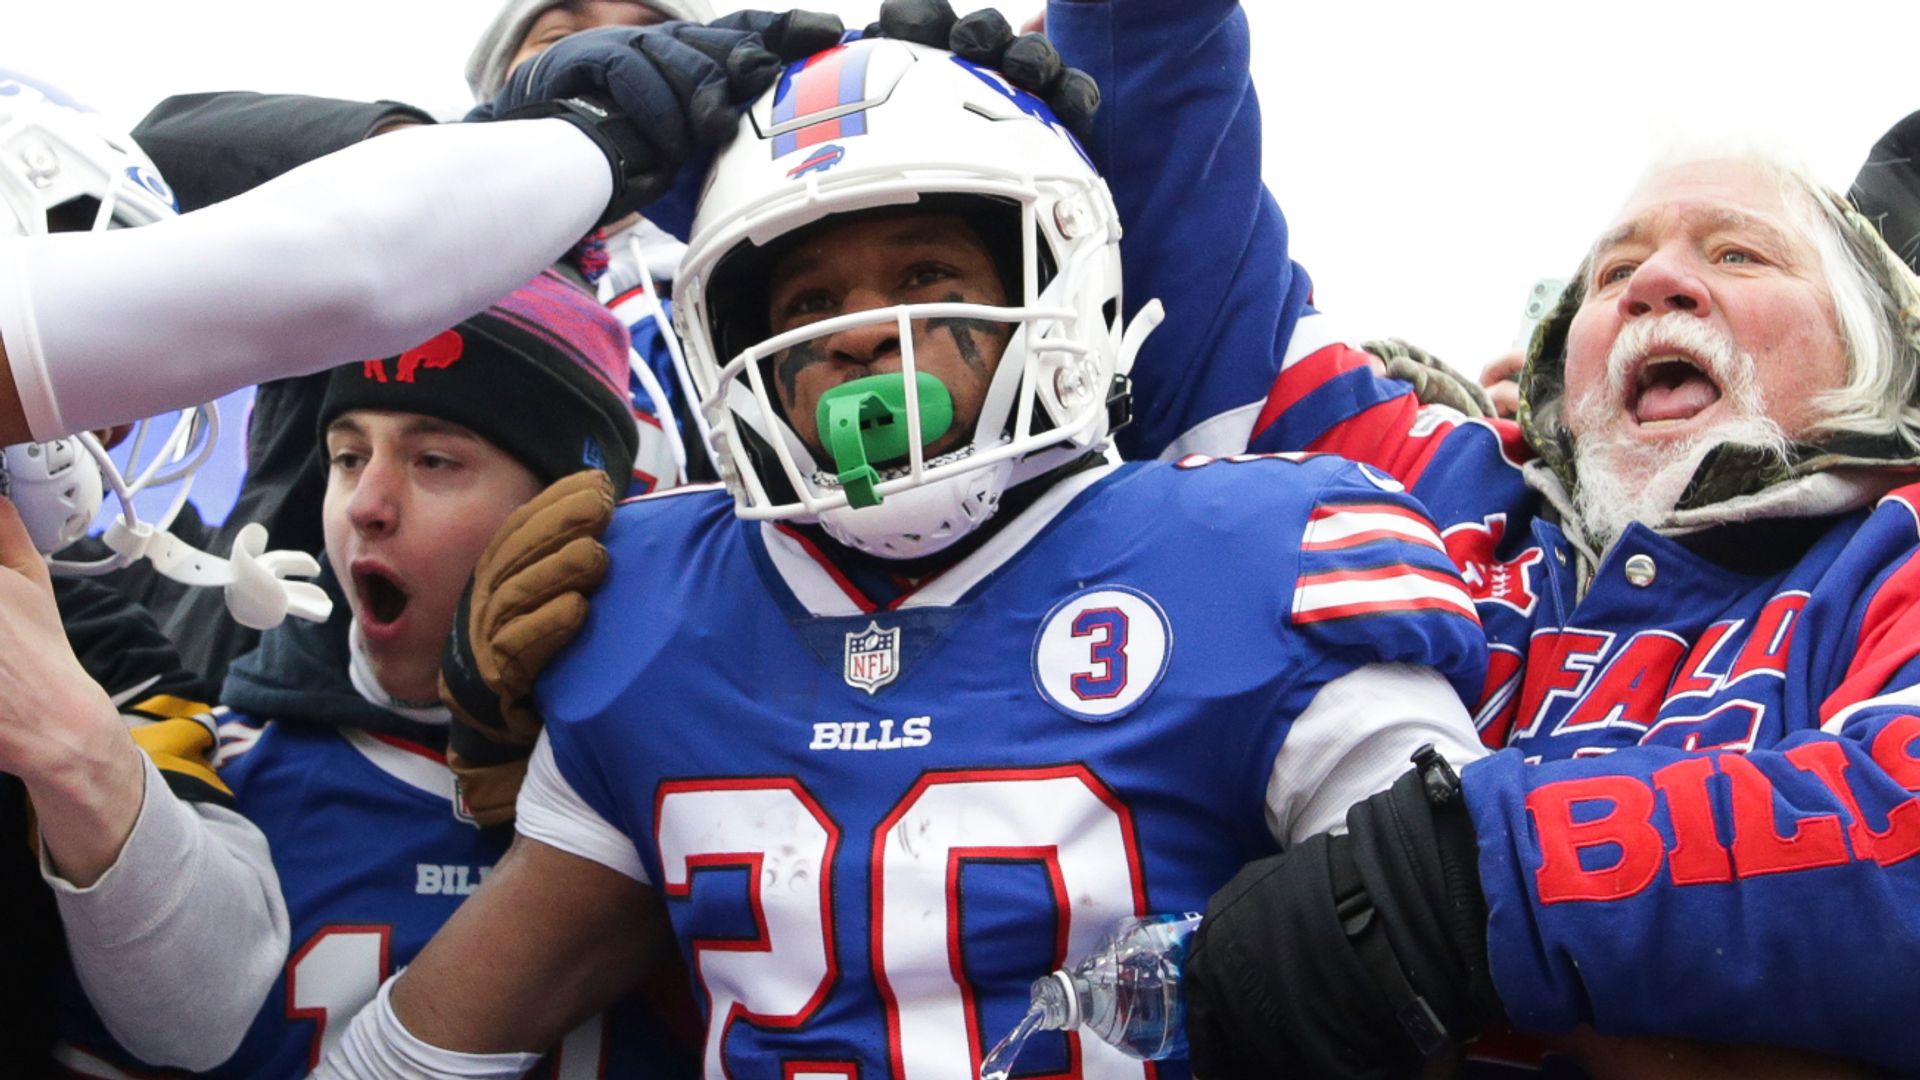 Buffalo's Hines to miss entire season after jet ski accident